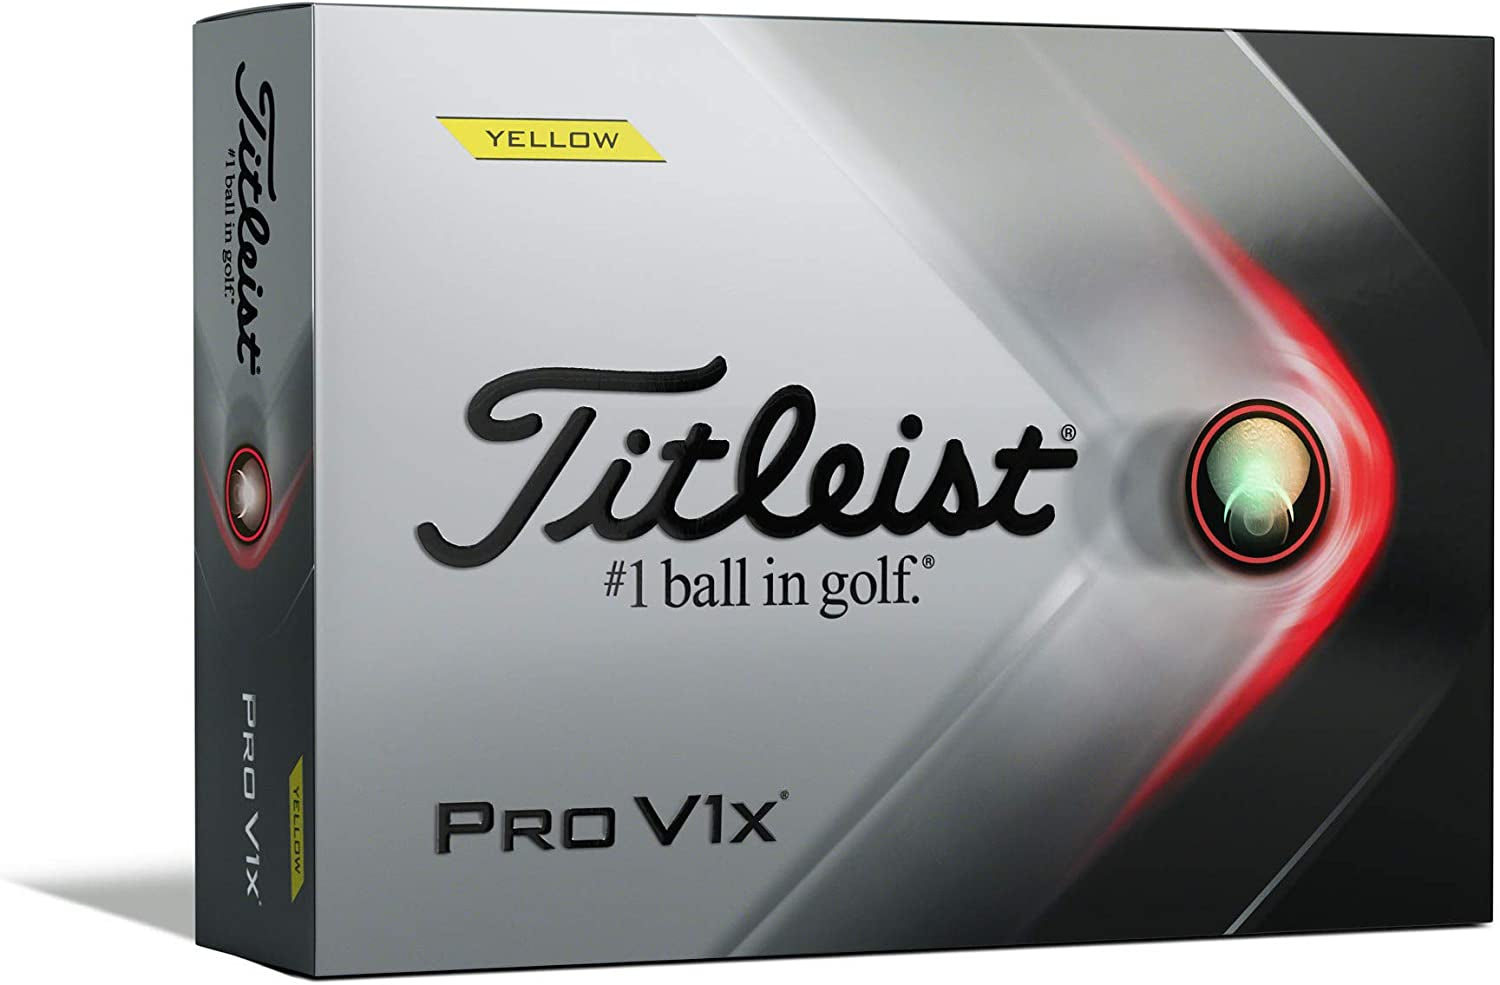 "Unleash Your Golfing Potential with Pro V1X Golf Balls - Dominate the Course with Incredible Distance and Pinpoint Control (Set of 12)"